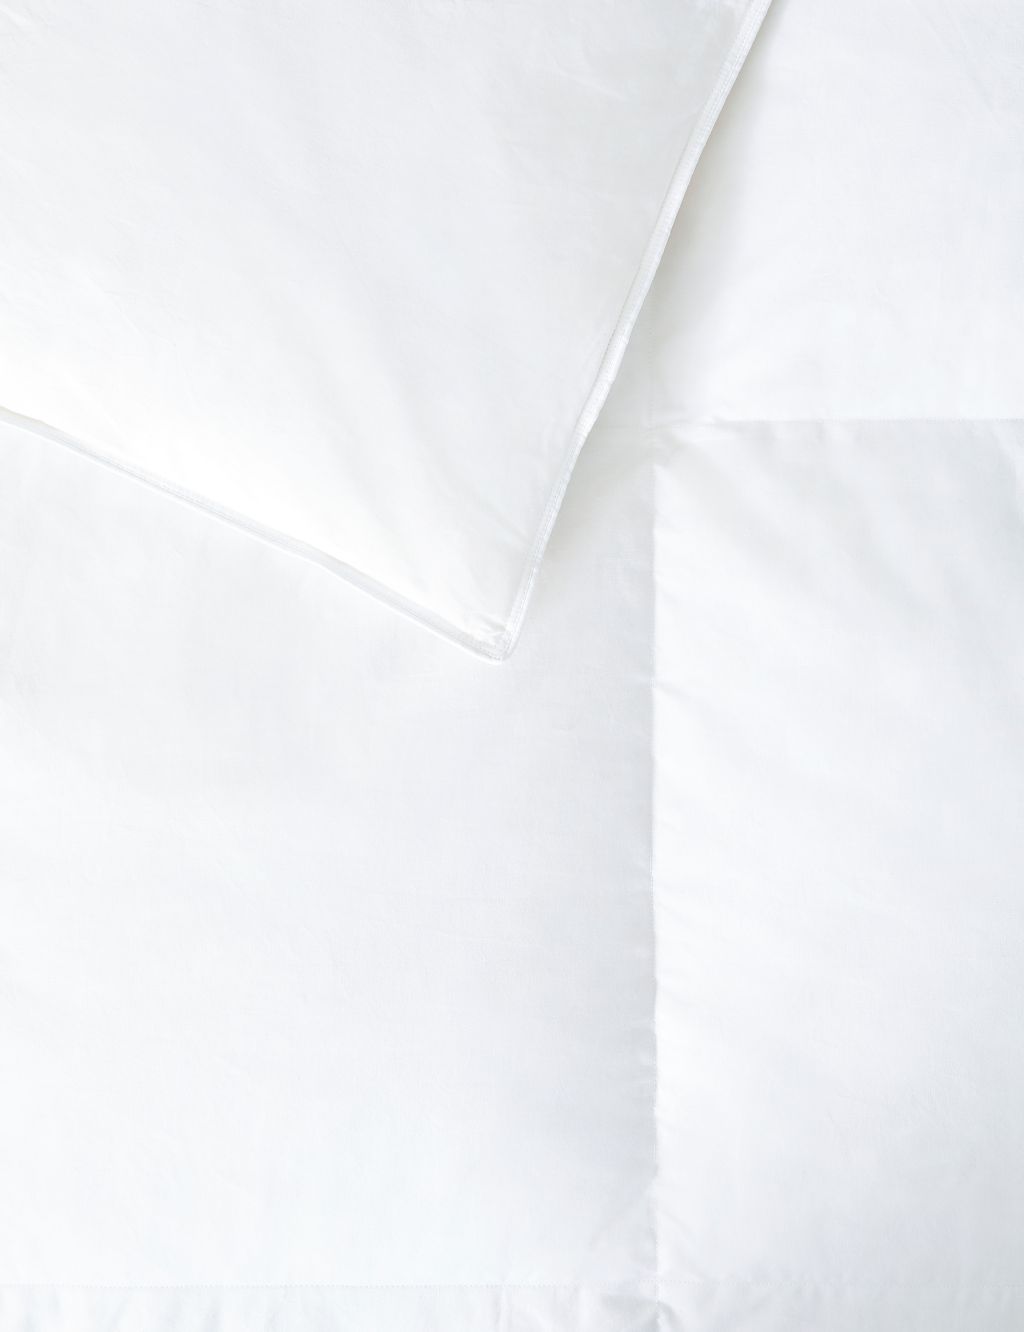 Duck Feather & Down 10.5 Tog Duvet image 2